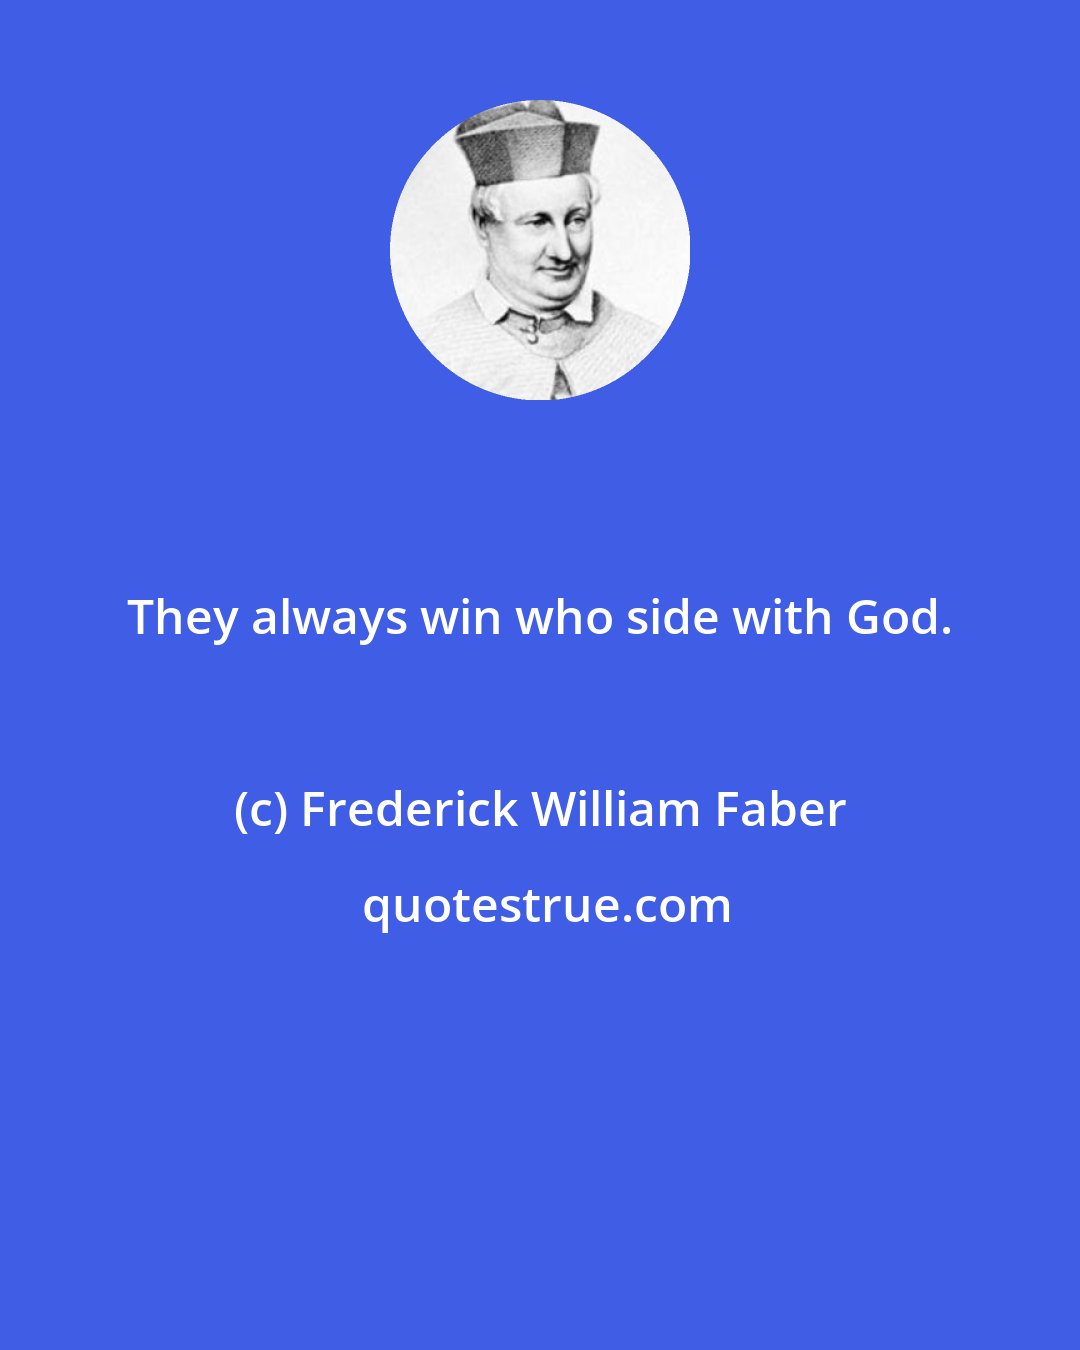 Frederick William Faber: They always win who side with God.